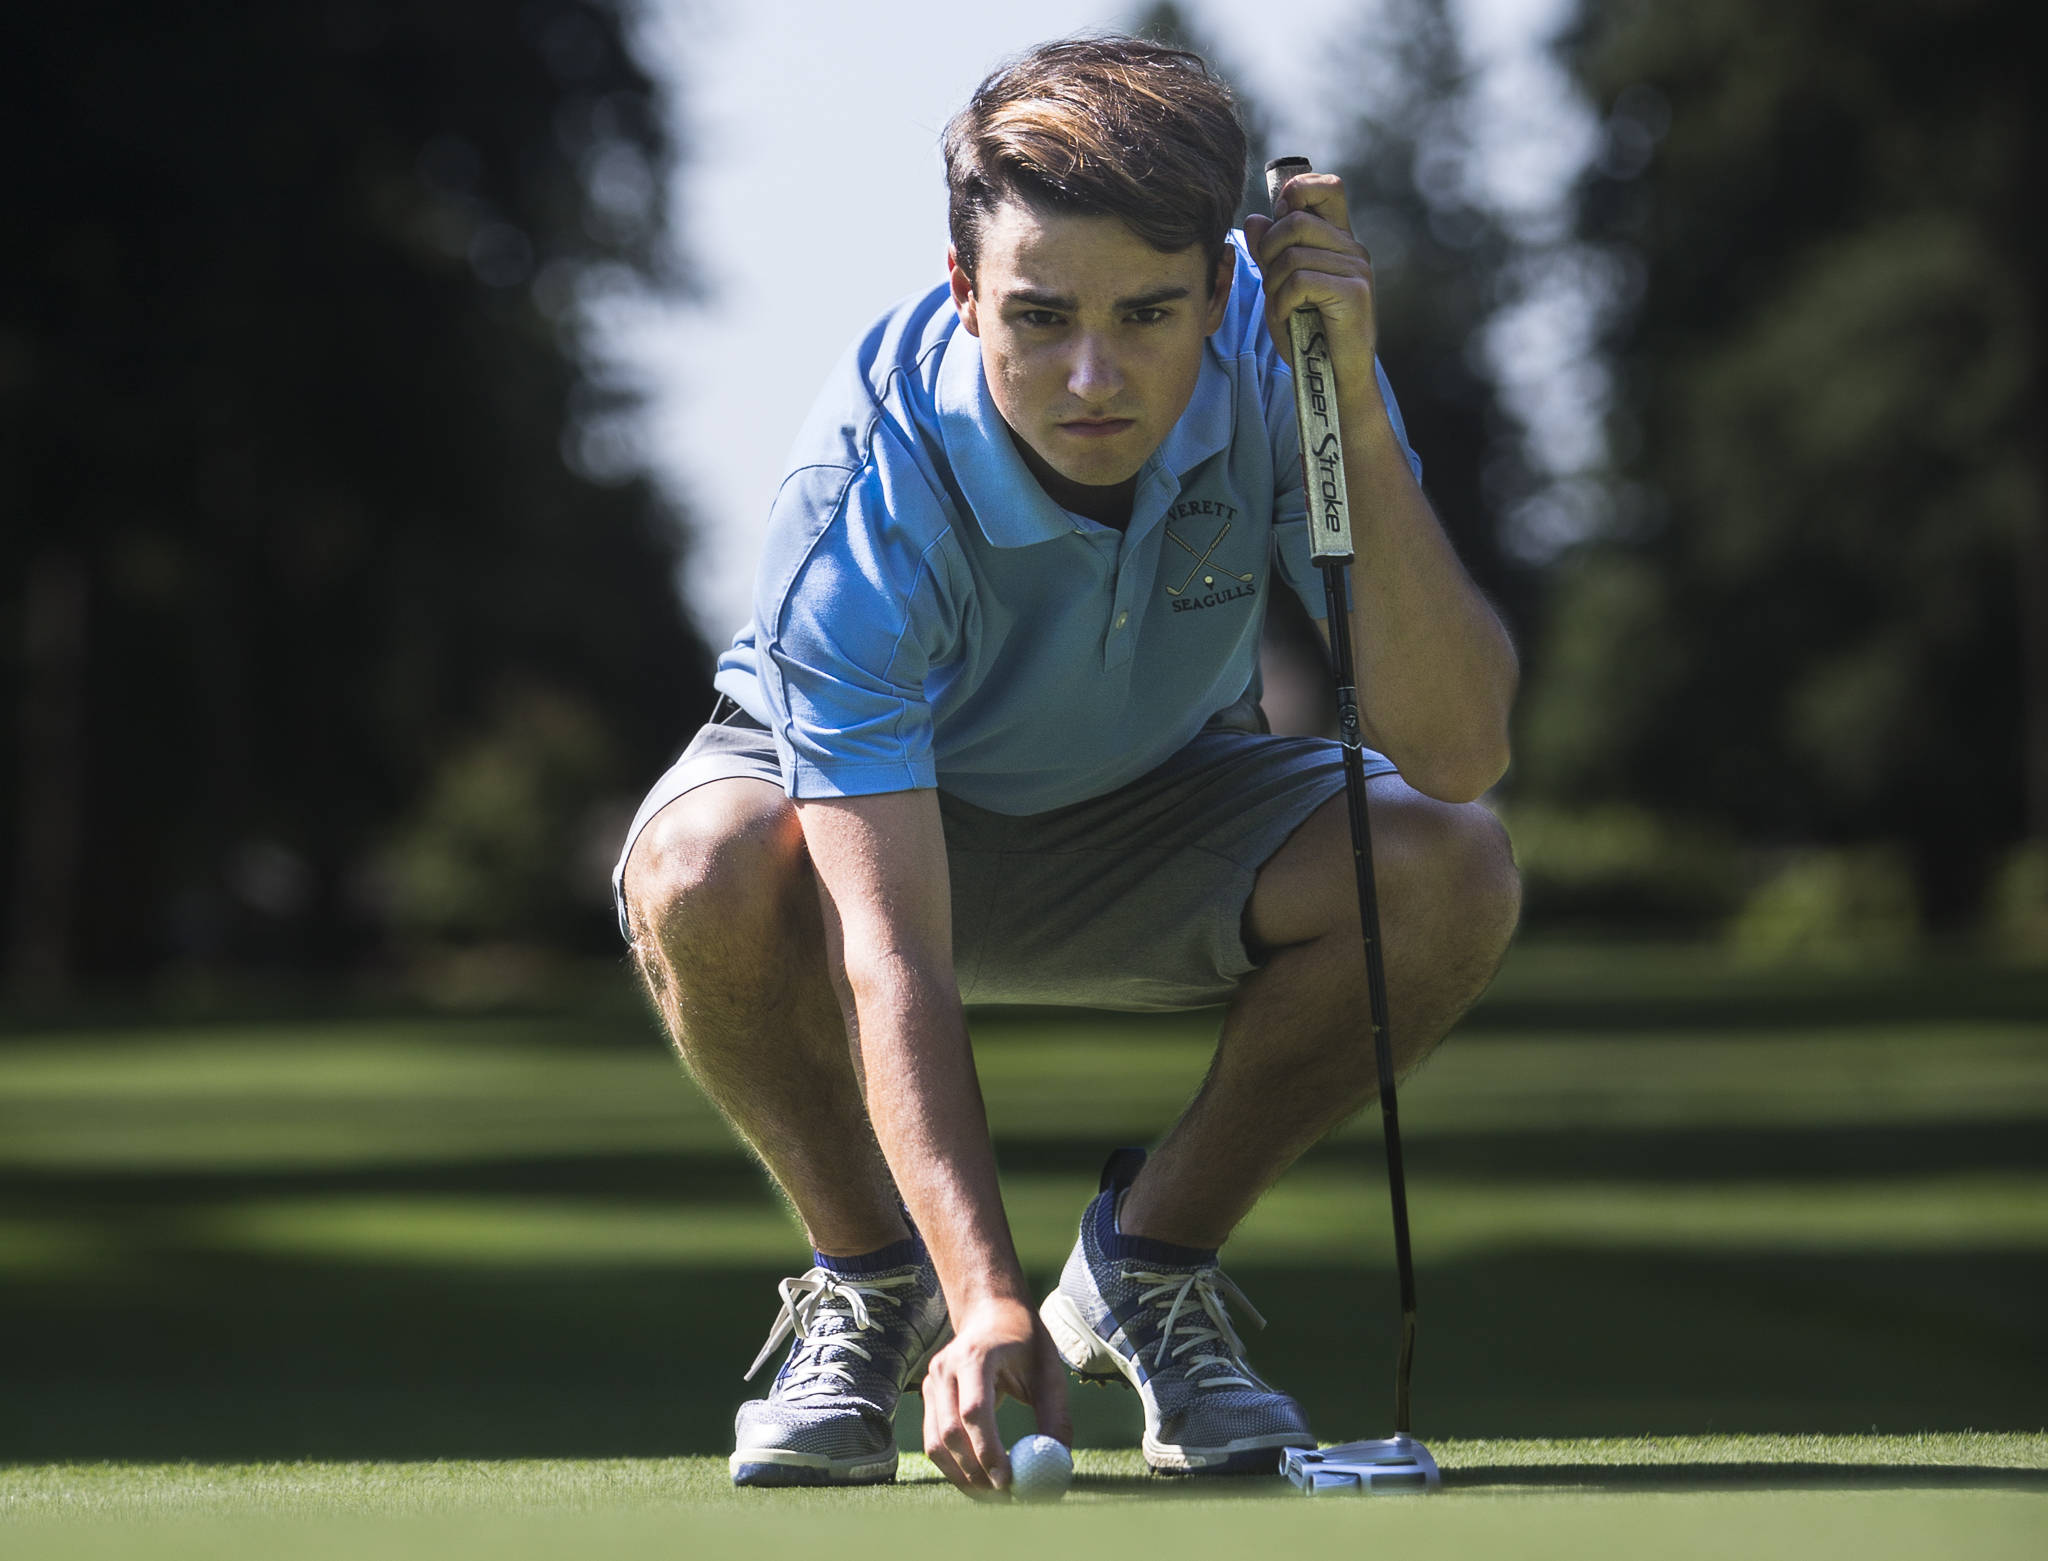 Recent Everett High School graduate Austin Duffy plans to continue his golfing career at Bellevue College. (Olivia Vanni / The Herald)